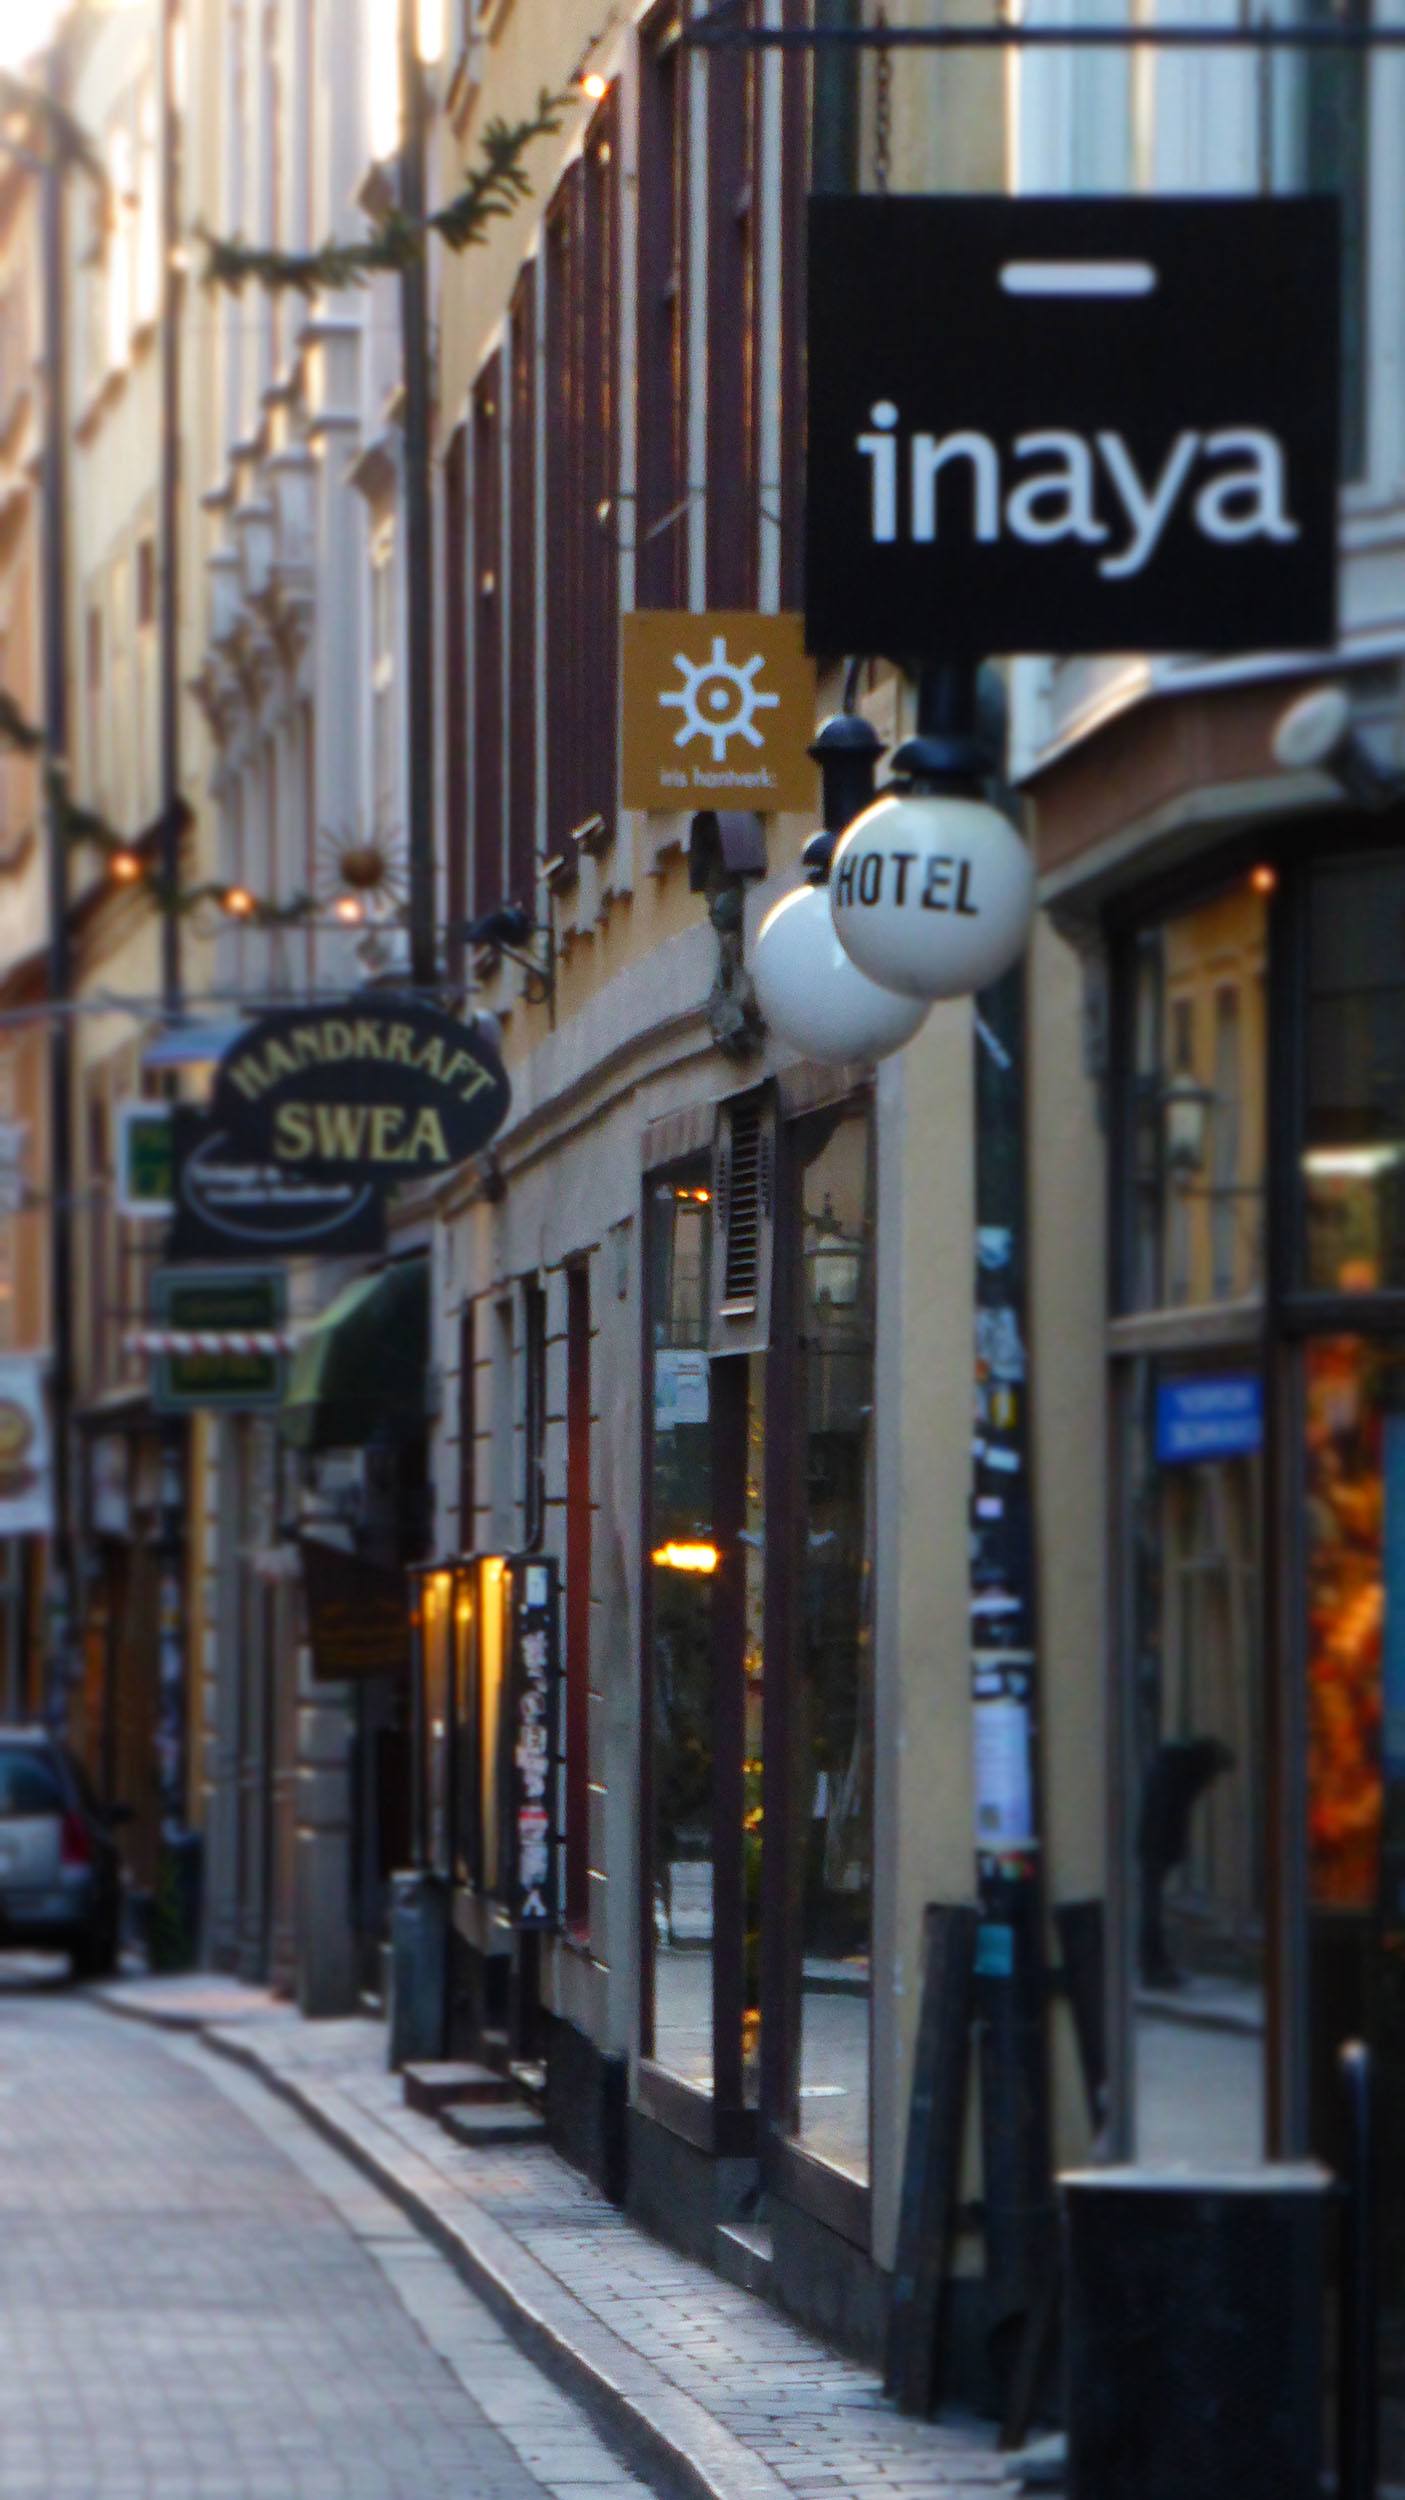 A shopping street in Stockholm Sweden